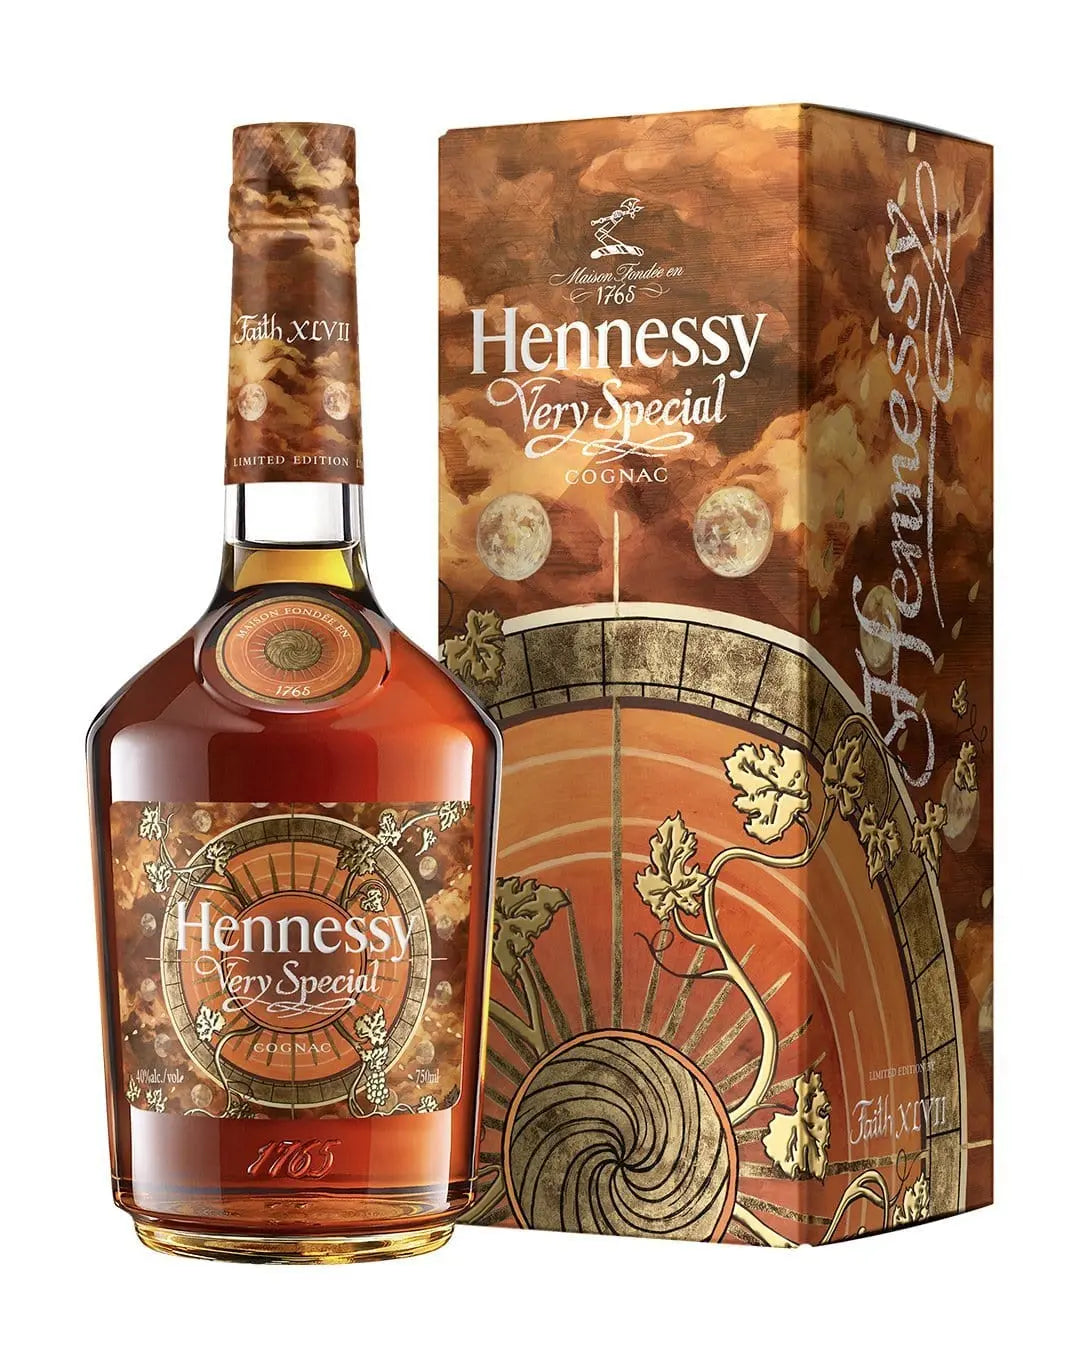 Hennessy Vs Limited Edition Gold Bottle - 750 ml